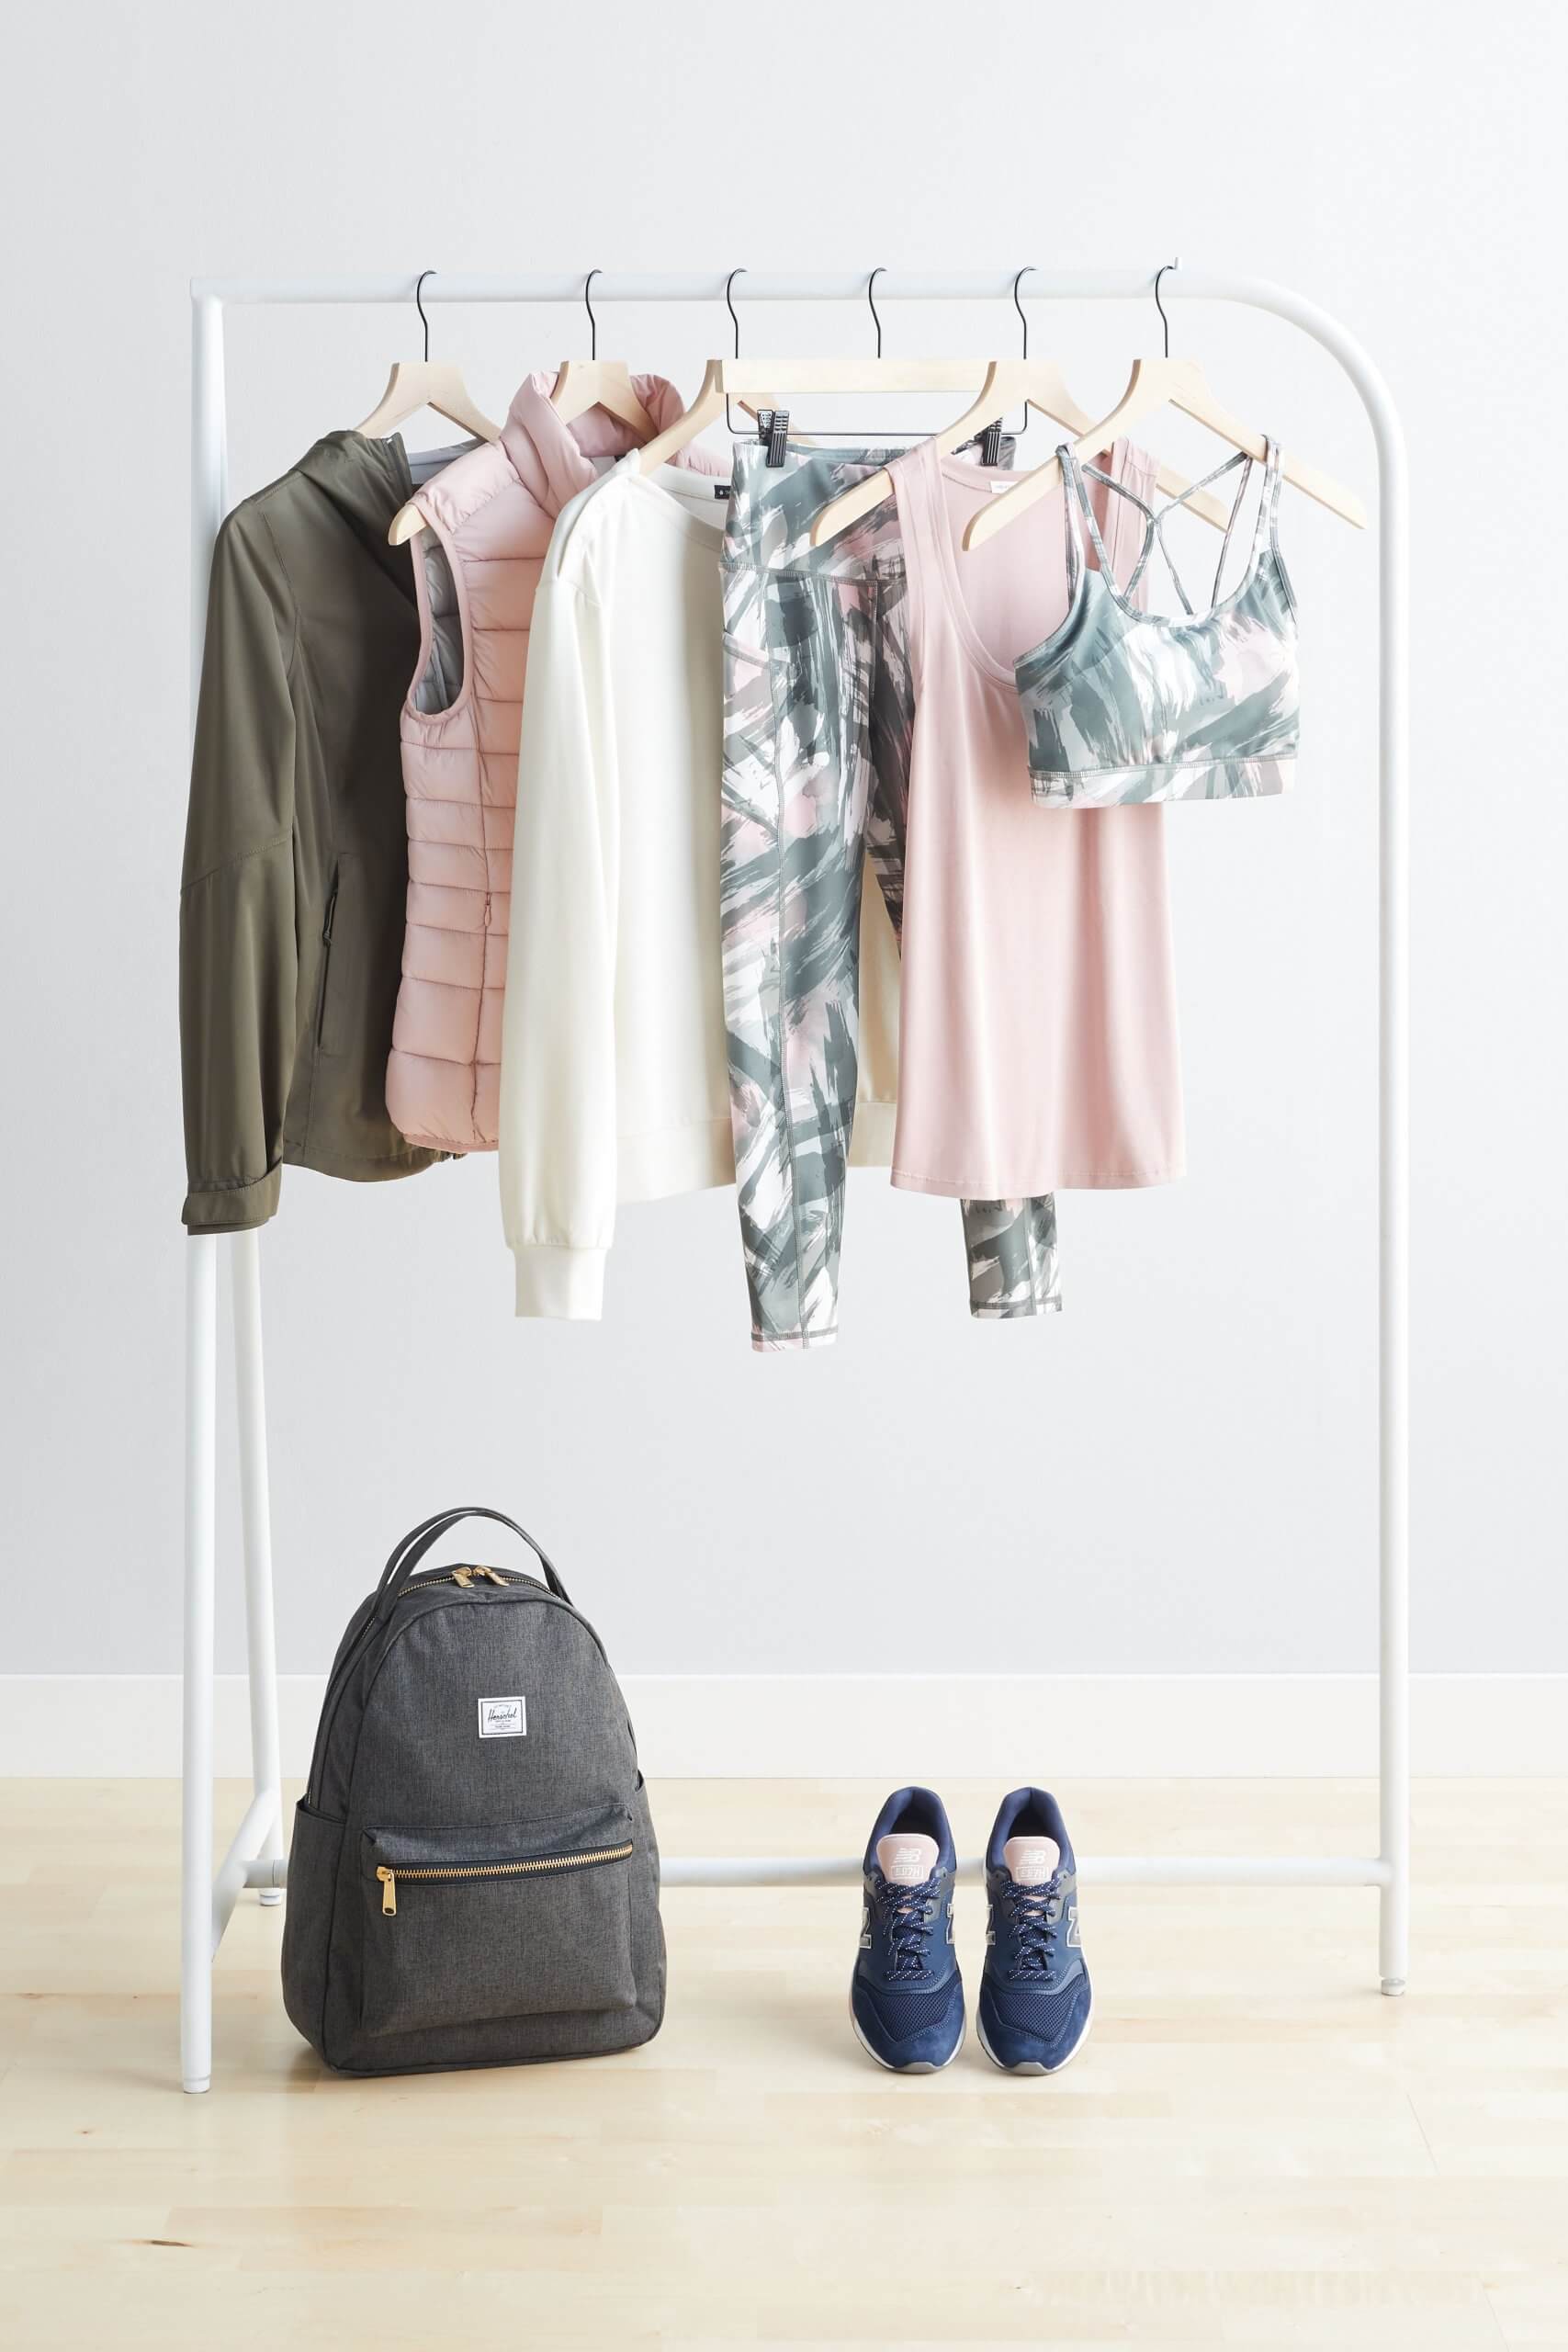 Stitch Fix Women’s olive jacket, pink puffer vest, white crew neck sweatshirt, tropical print leggings, pink tank and tropical print sports bra on a rack. Grey backpack and navy sneakers on the floor.